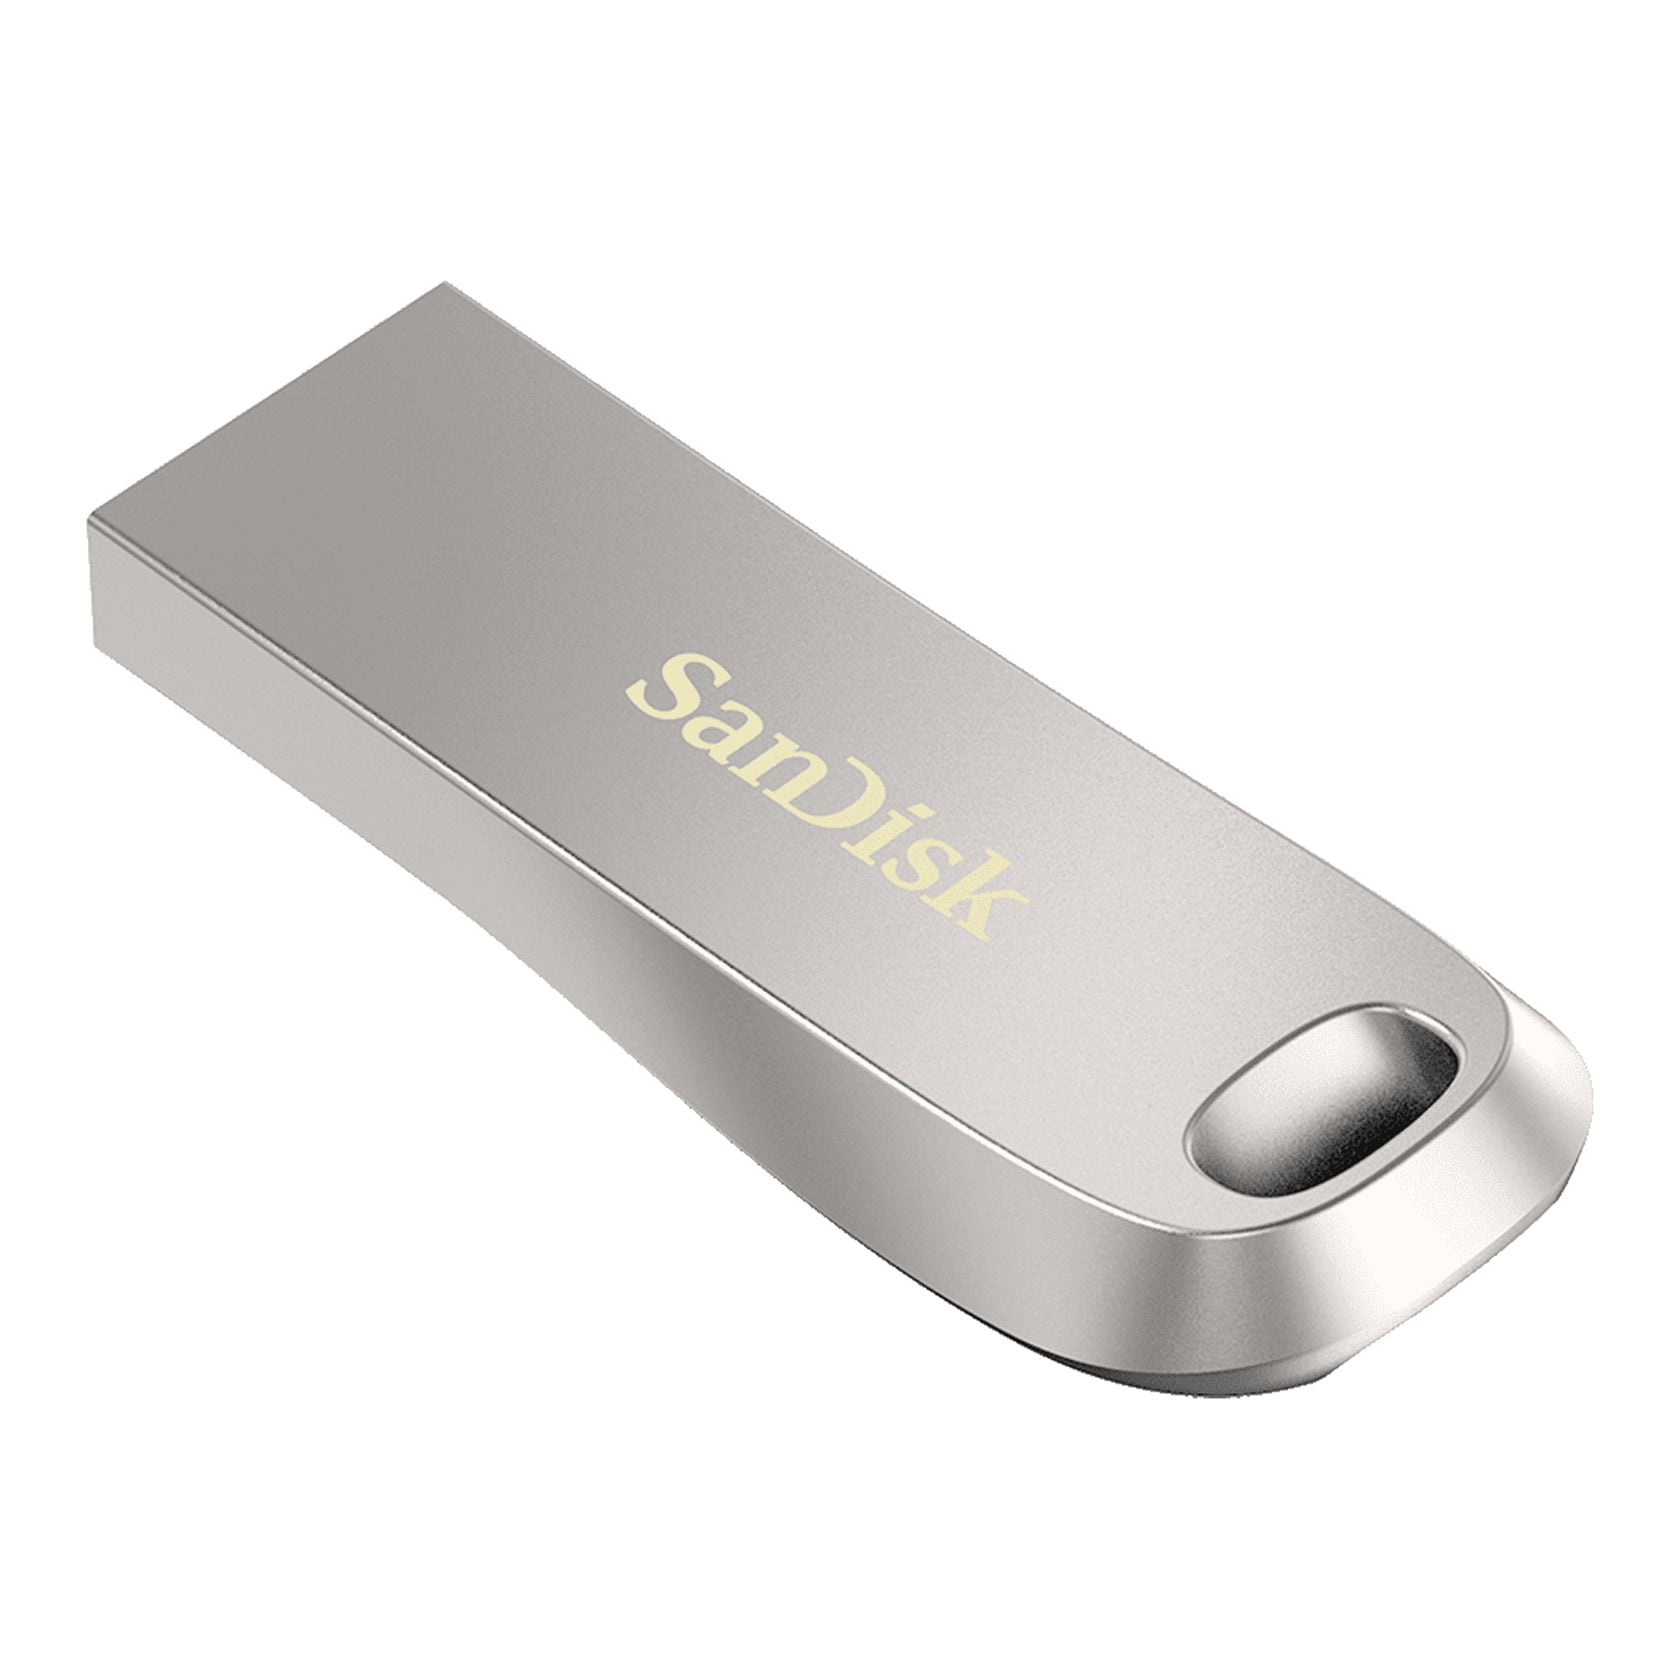 SanDisk 512GB Ultra Dual Luxe Flash Drive, 78343189